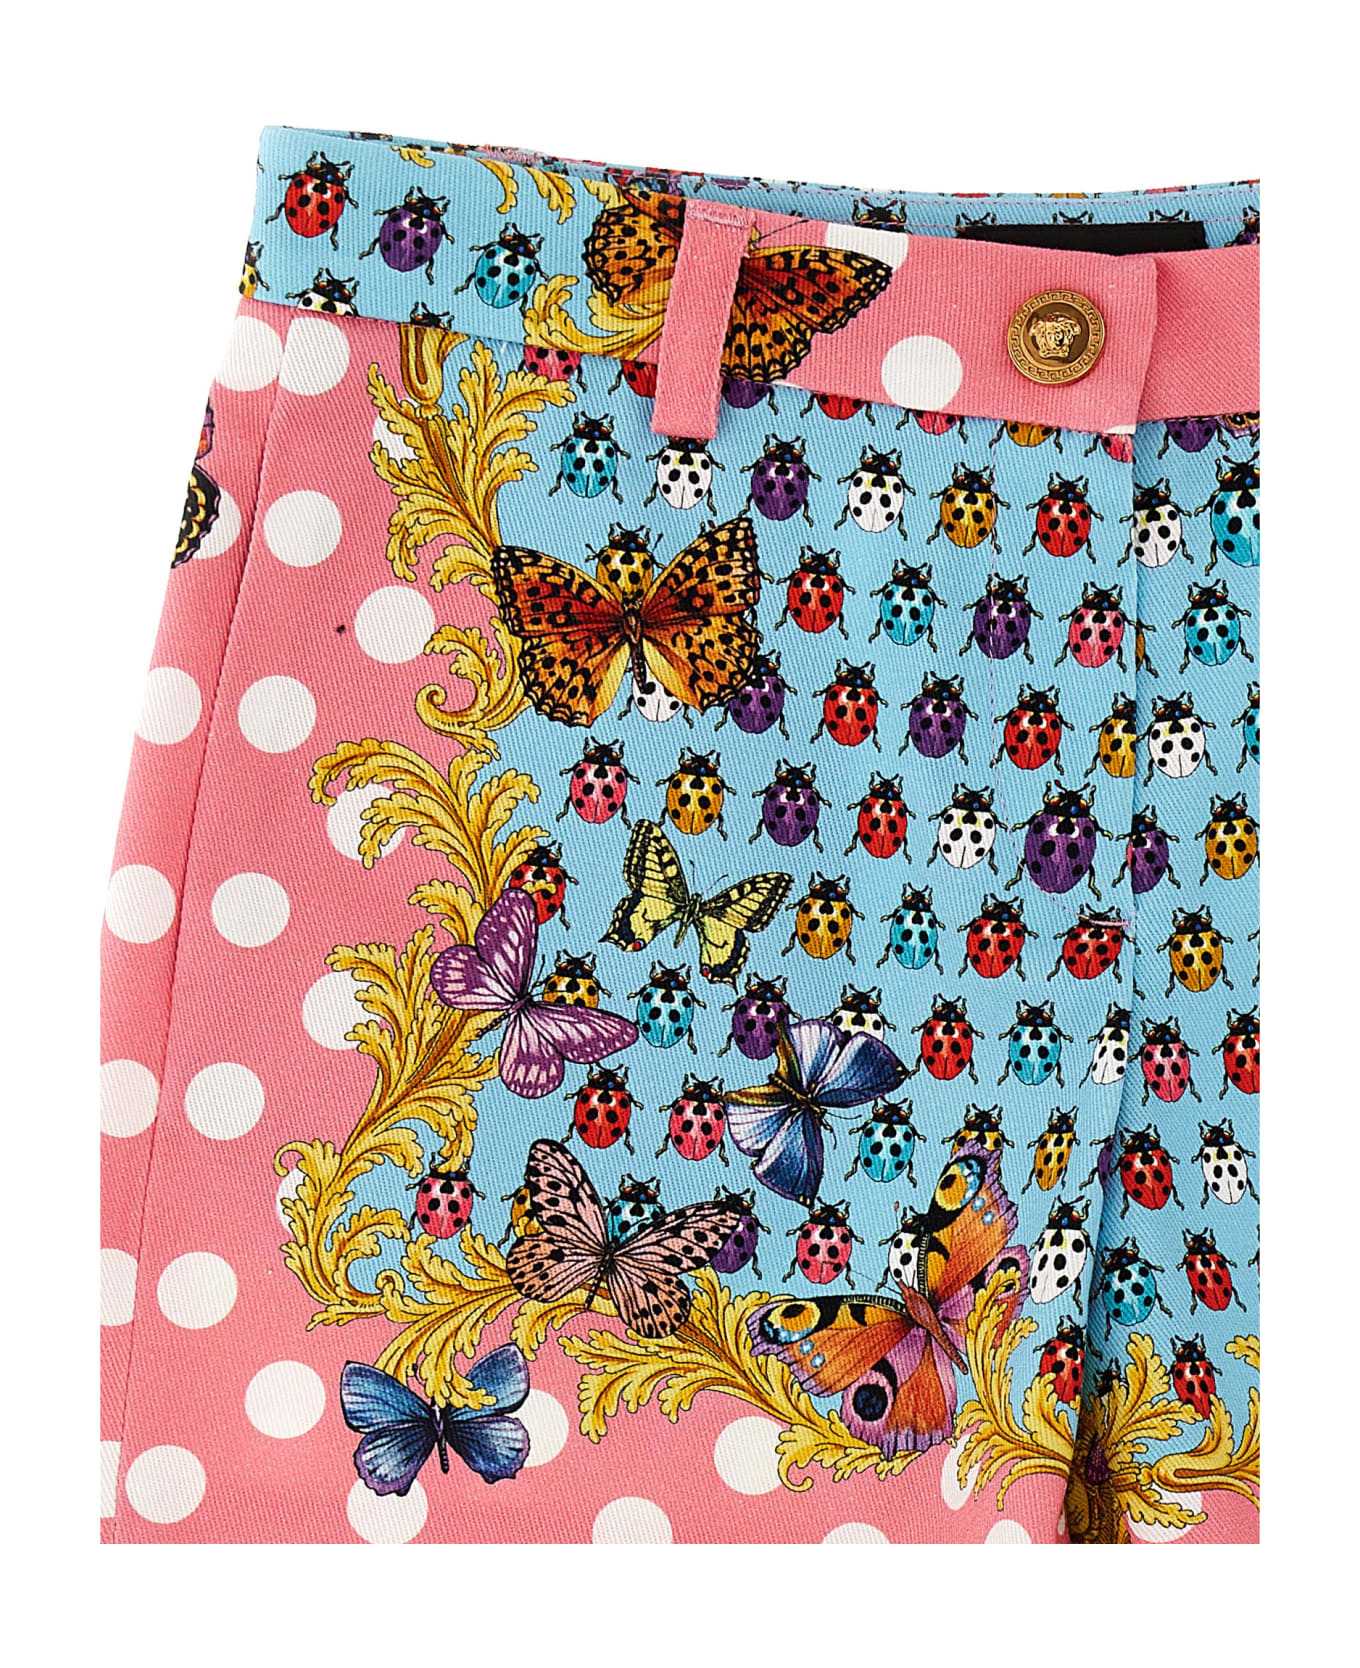 Versace 'heritage Butterflies & Ladybugs Kids' Capsule The Vacation - Multicolor ボトムス